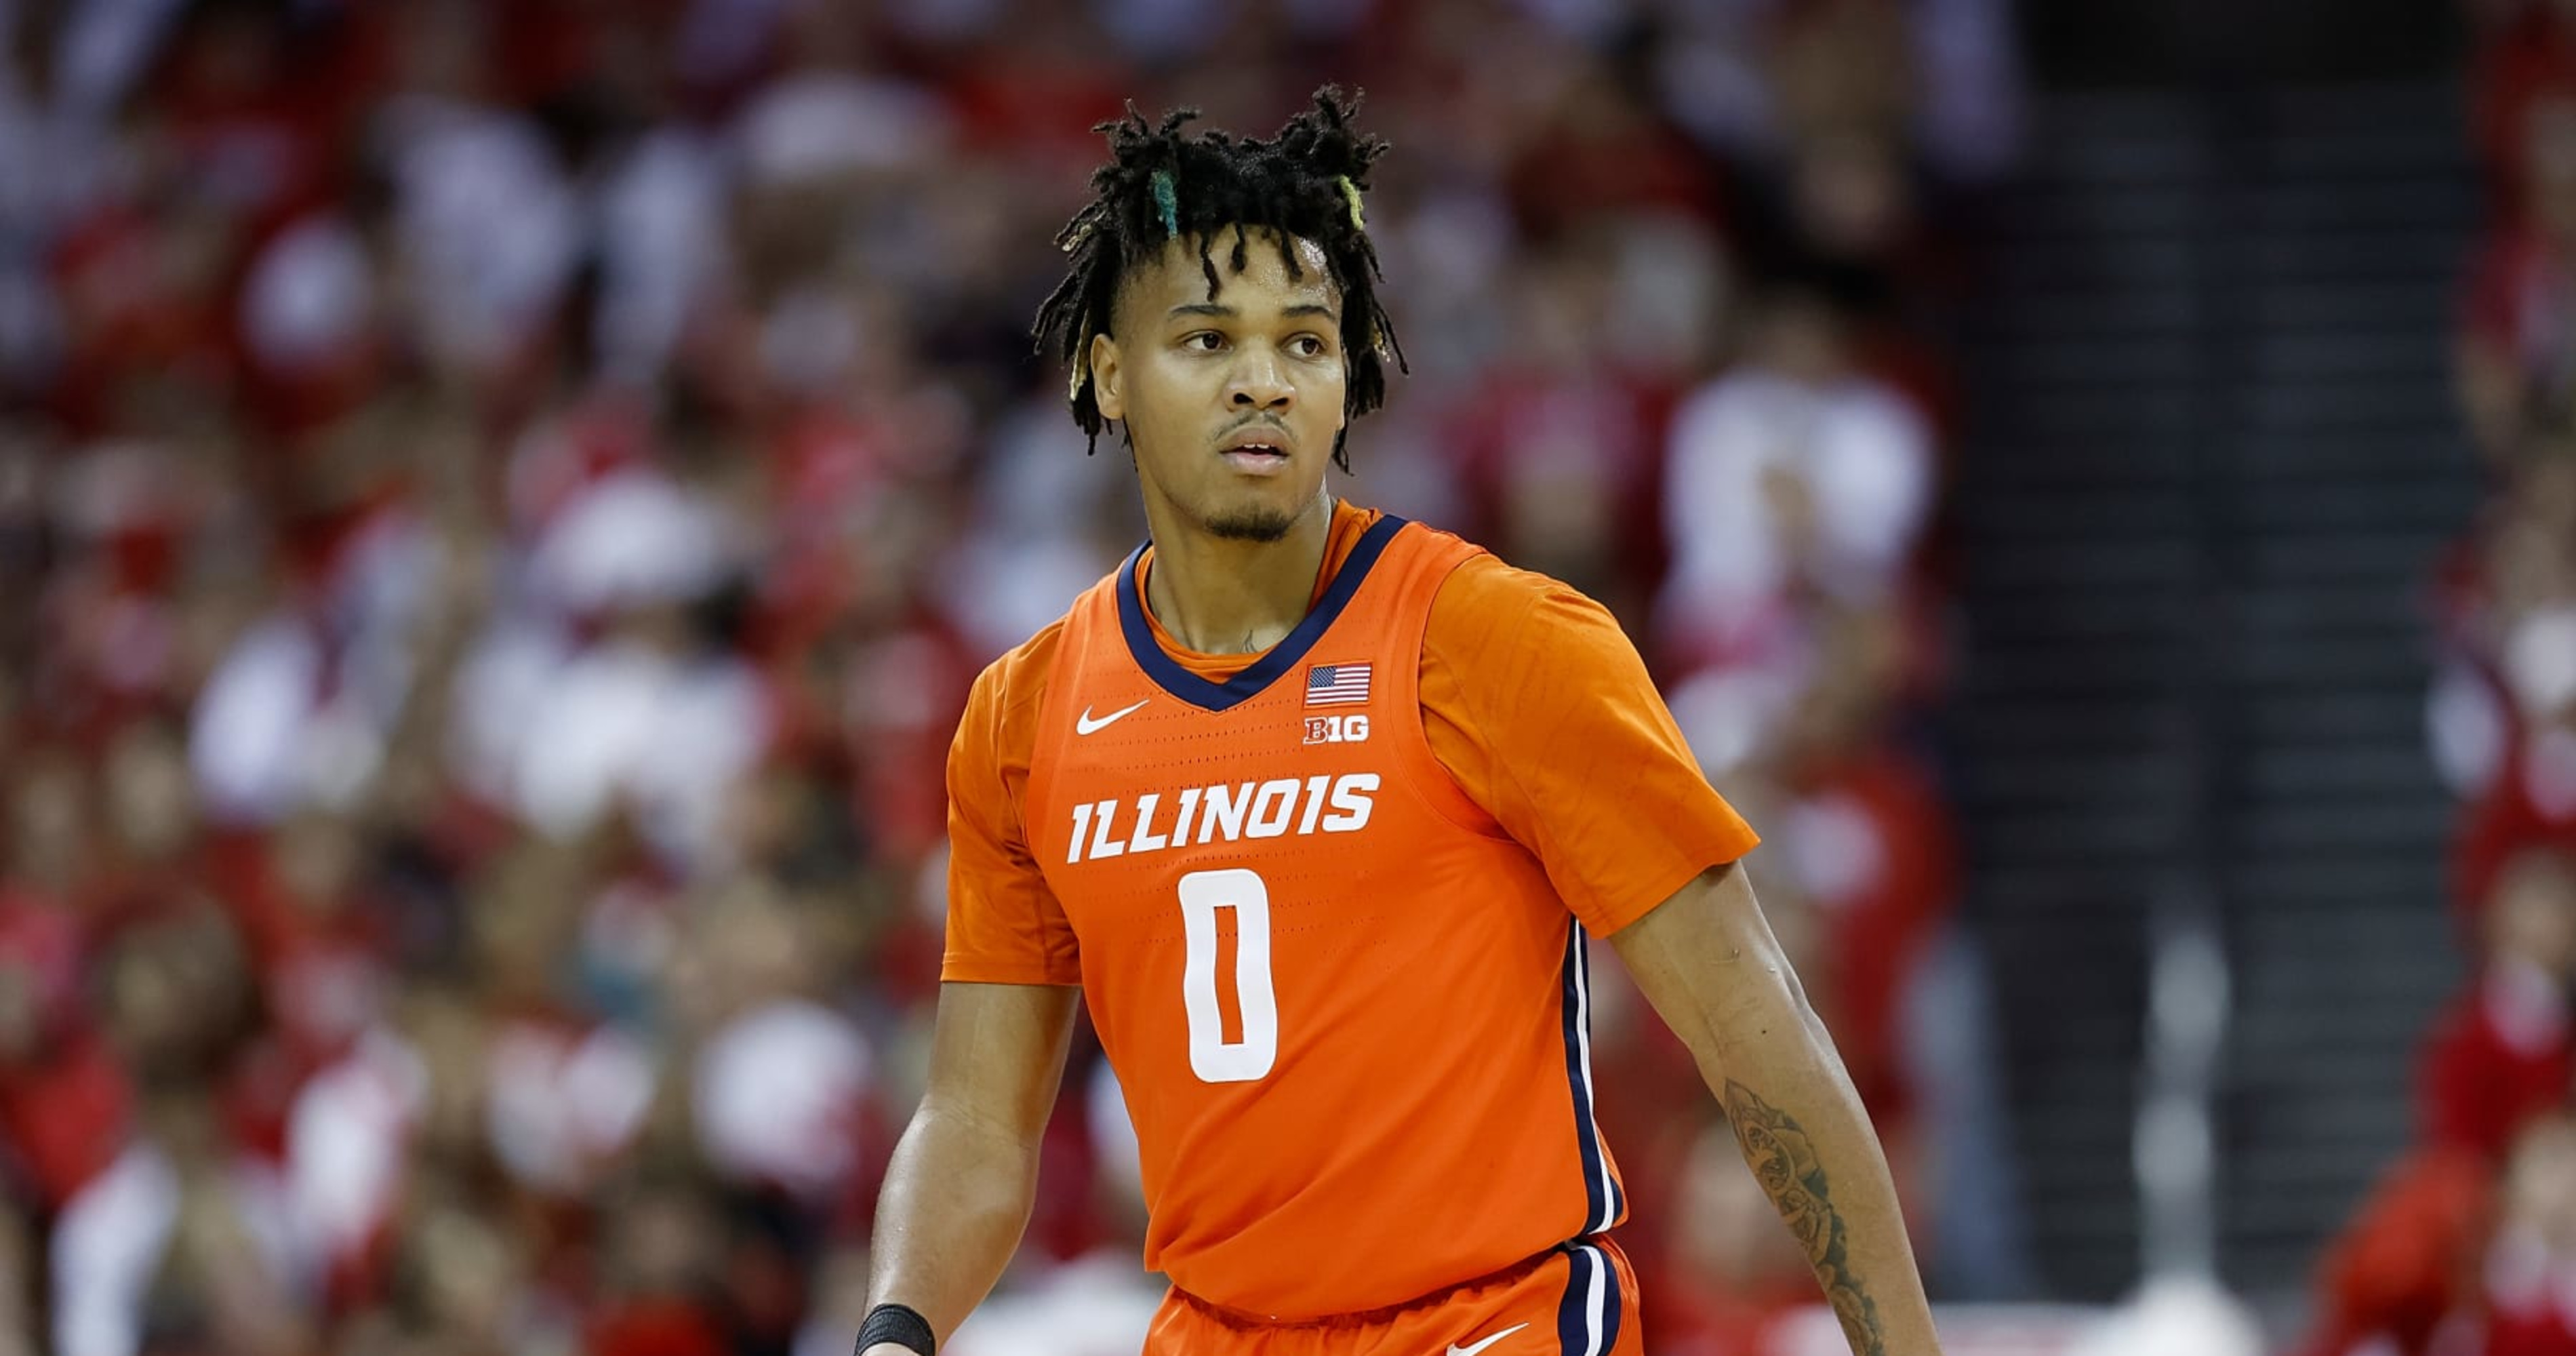 Ex-Illinois CBB Player Terrence Shannon Jr. to Face Trial on Rape, Battery Charges